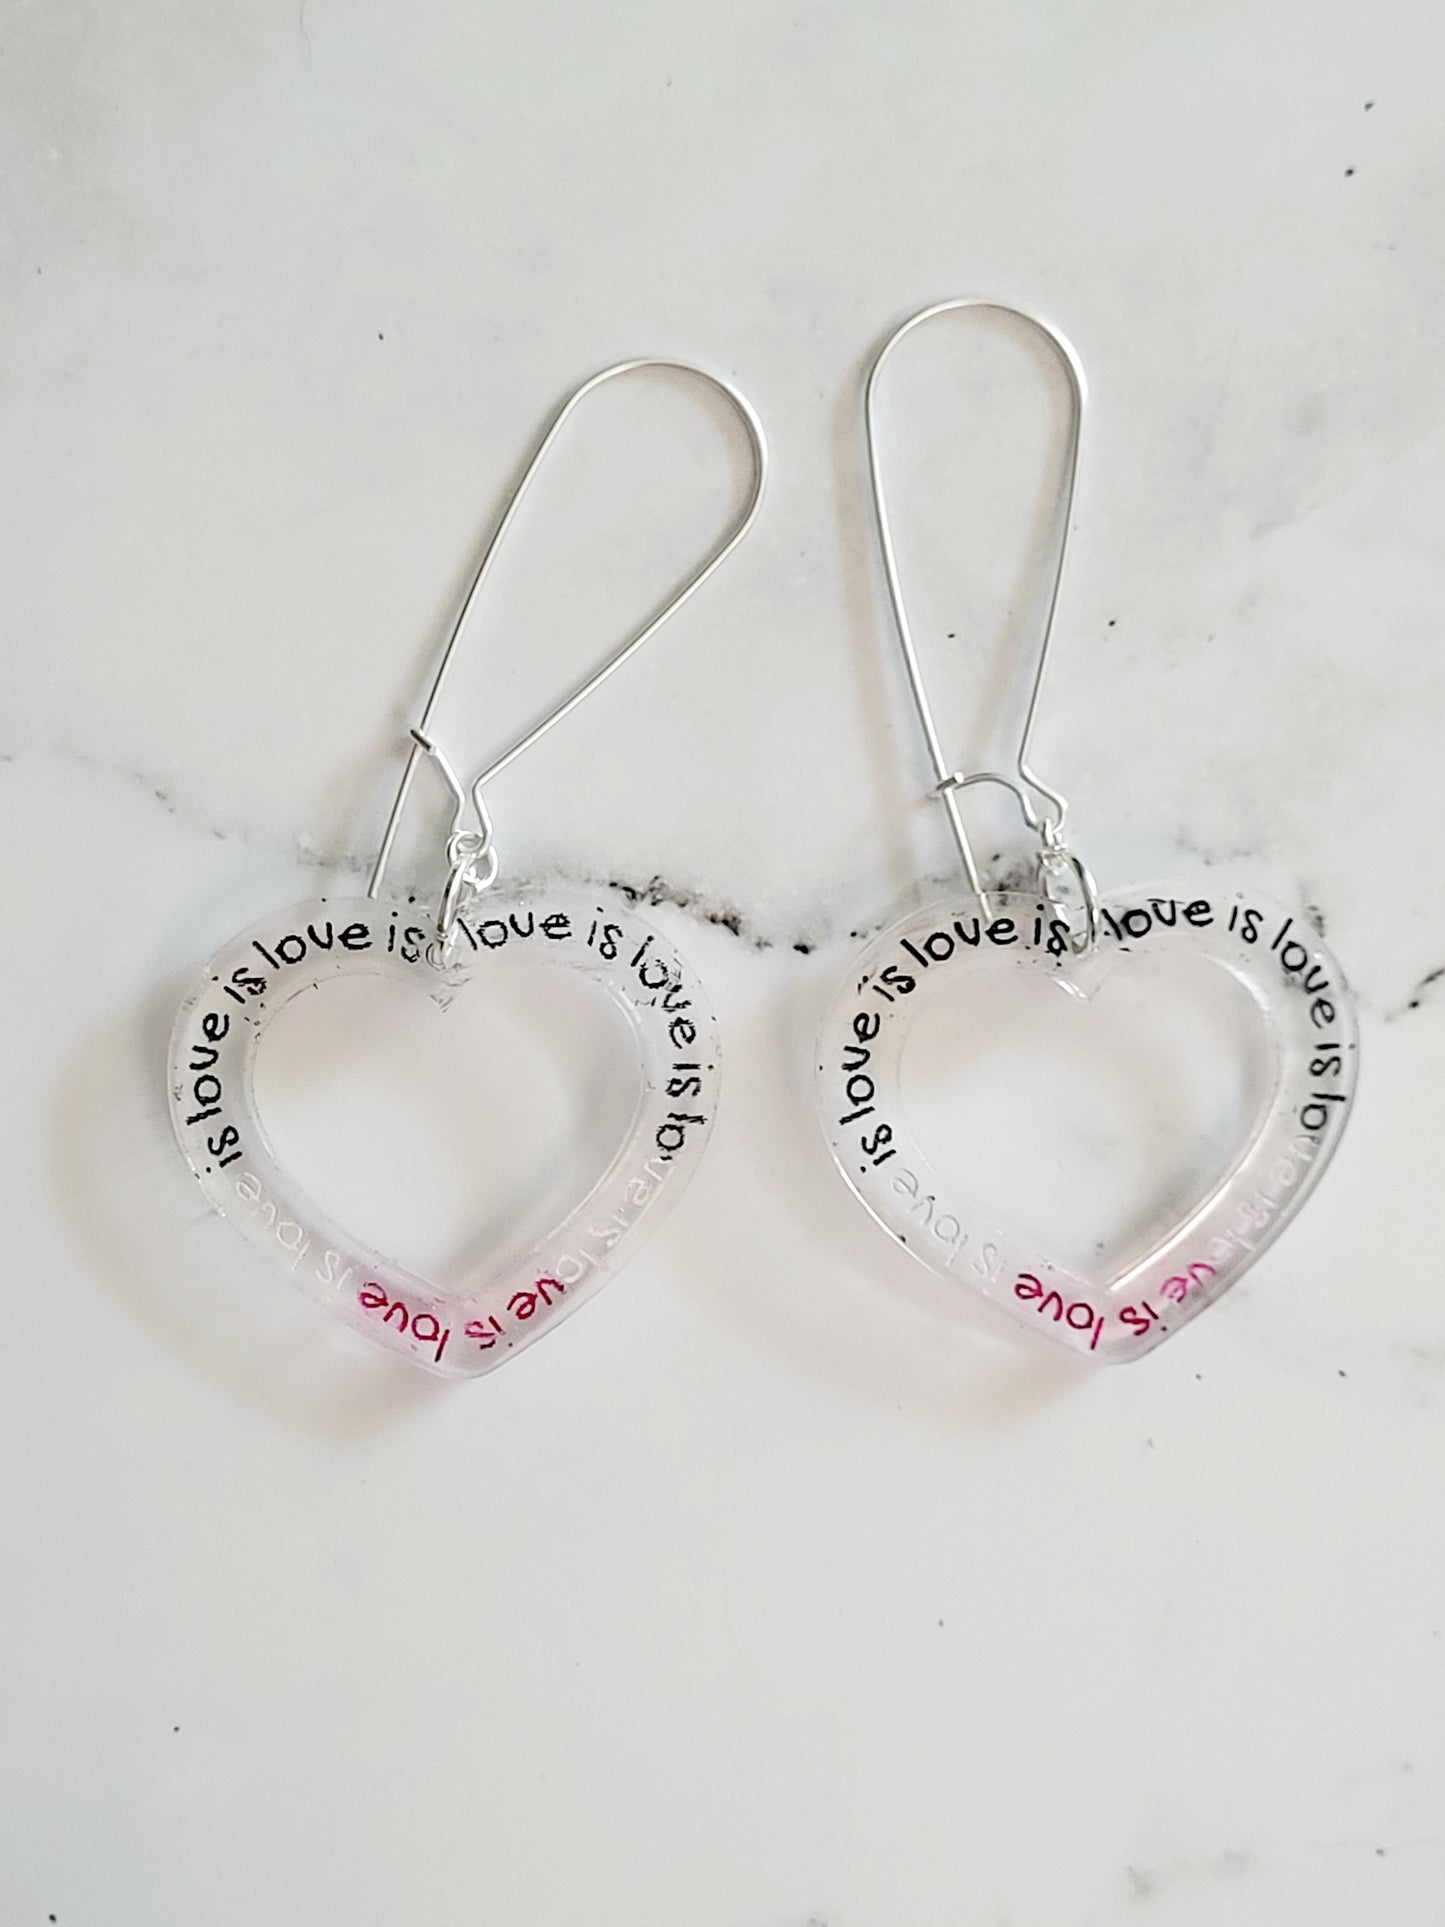 Closeup of the Asexual Love Is Love Earrings